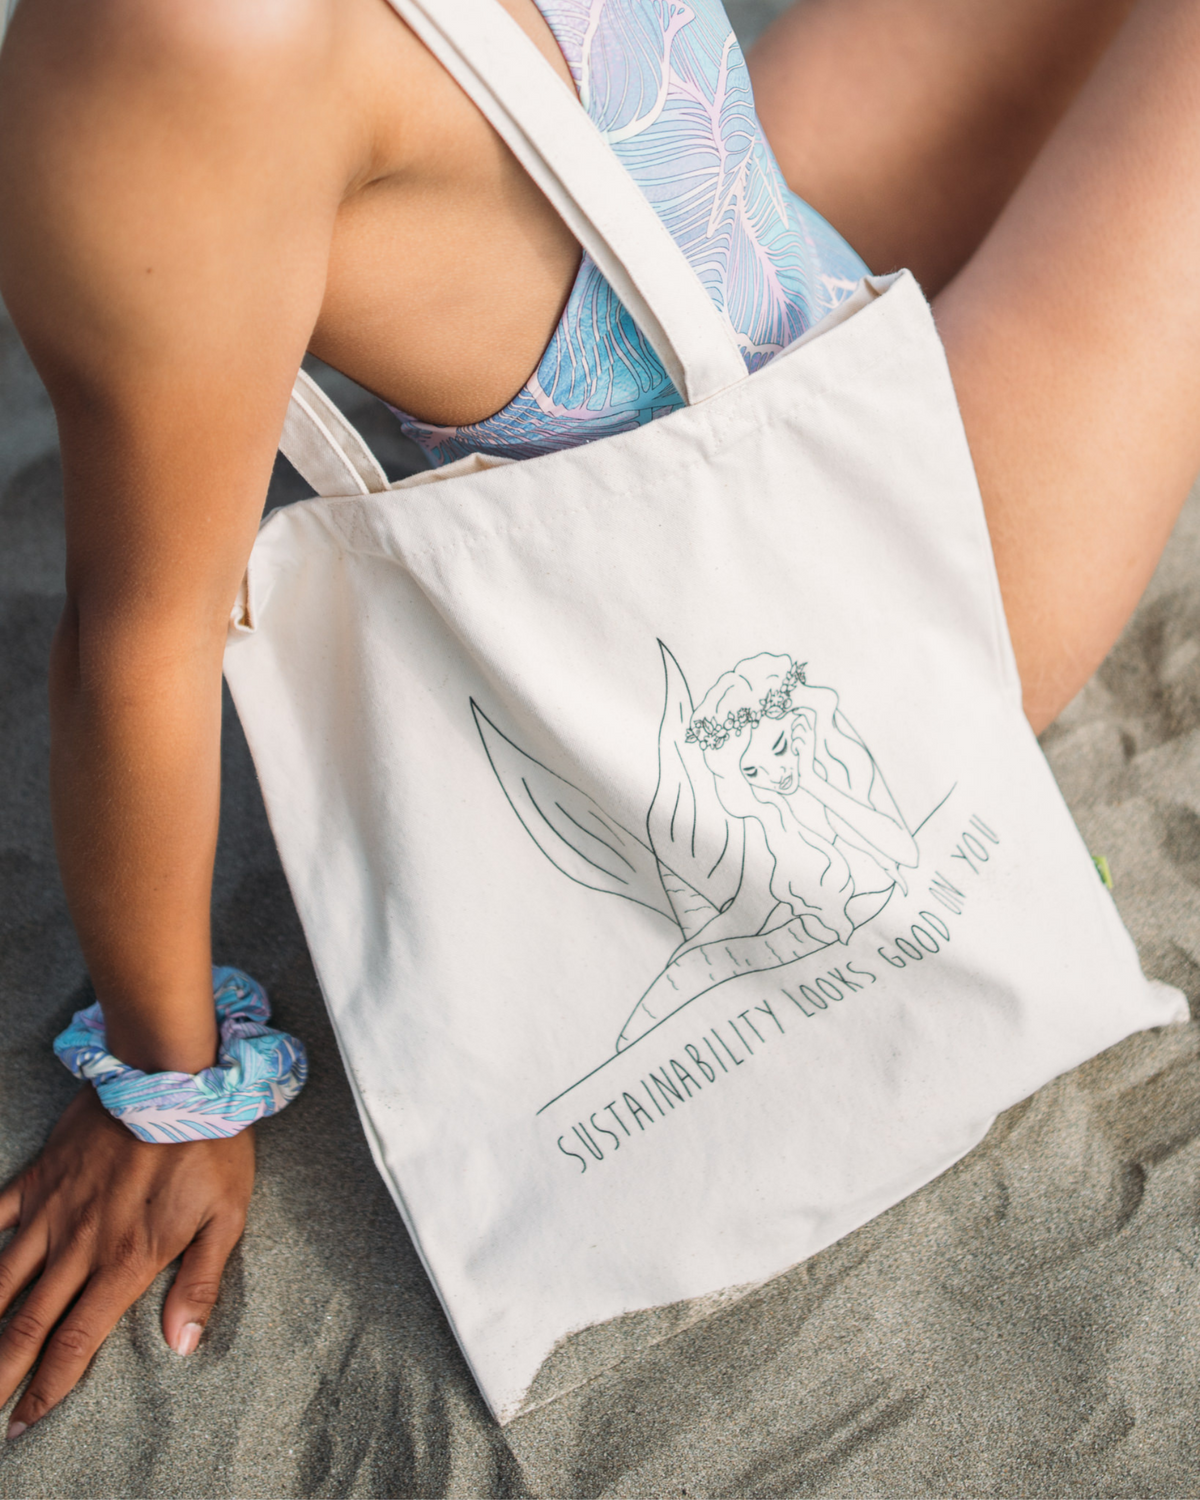 Tide and Seek Sustainable Swimwear tote bag on the beach worn by model with Tide + Seek slogan on the bag "Sustainability Looks Good On you". 